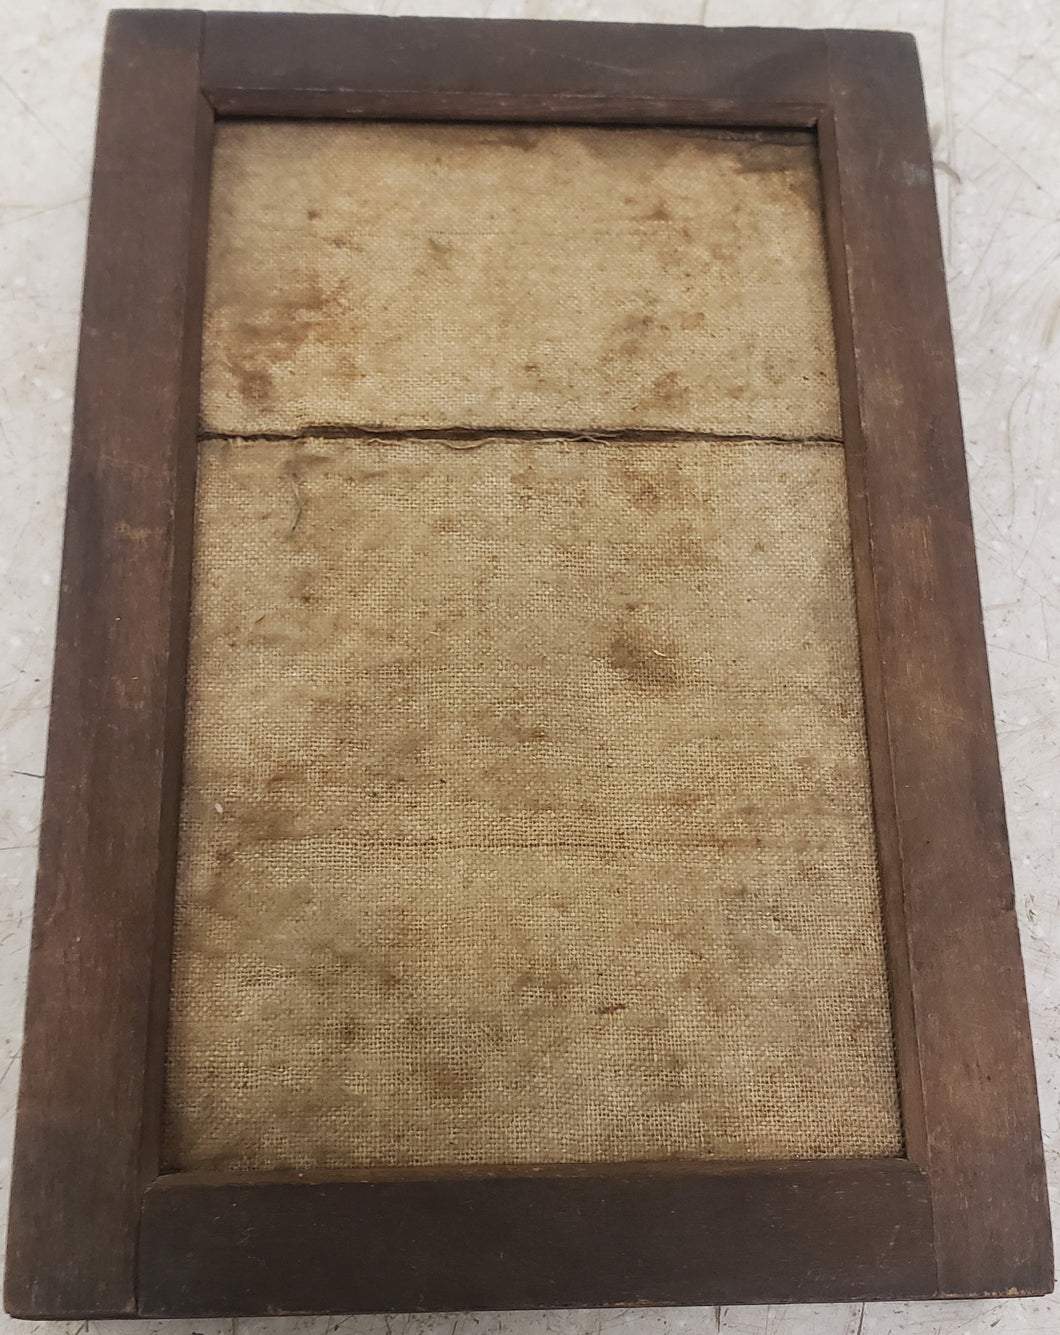 Vintage Tongue & Groove Wood Picture Frame with Hinged Flaps on Back (no glass) (7